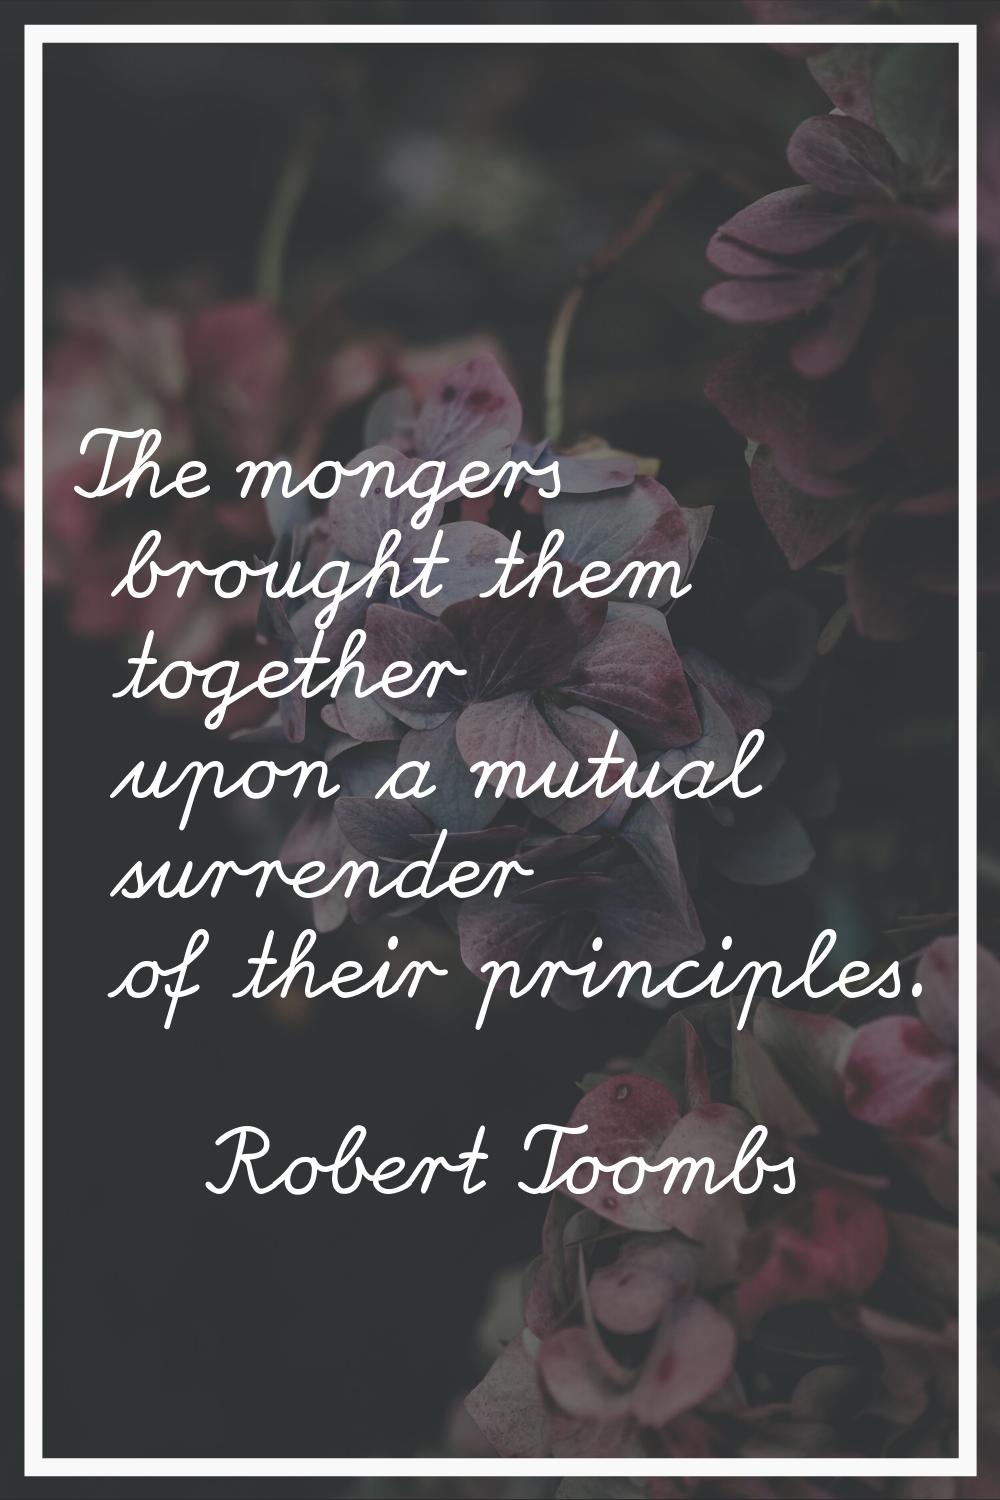 The mongers brought them together upon a mutual surrender of their principles.